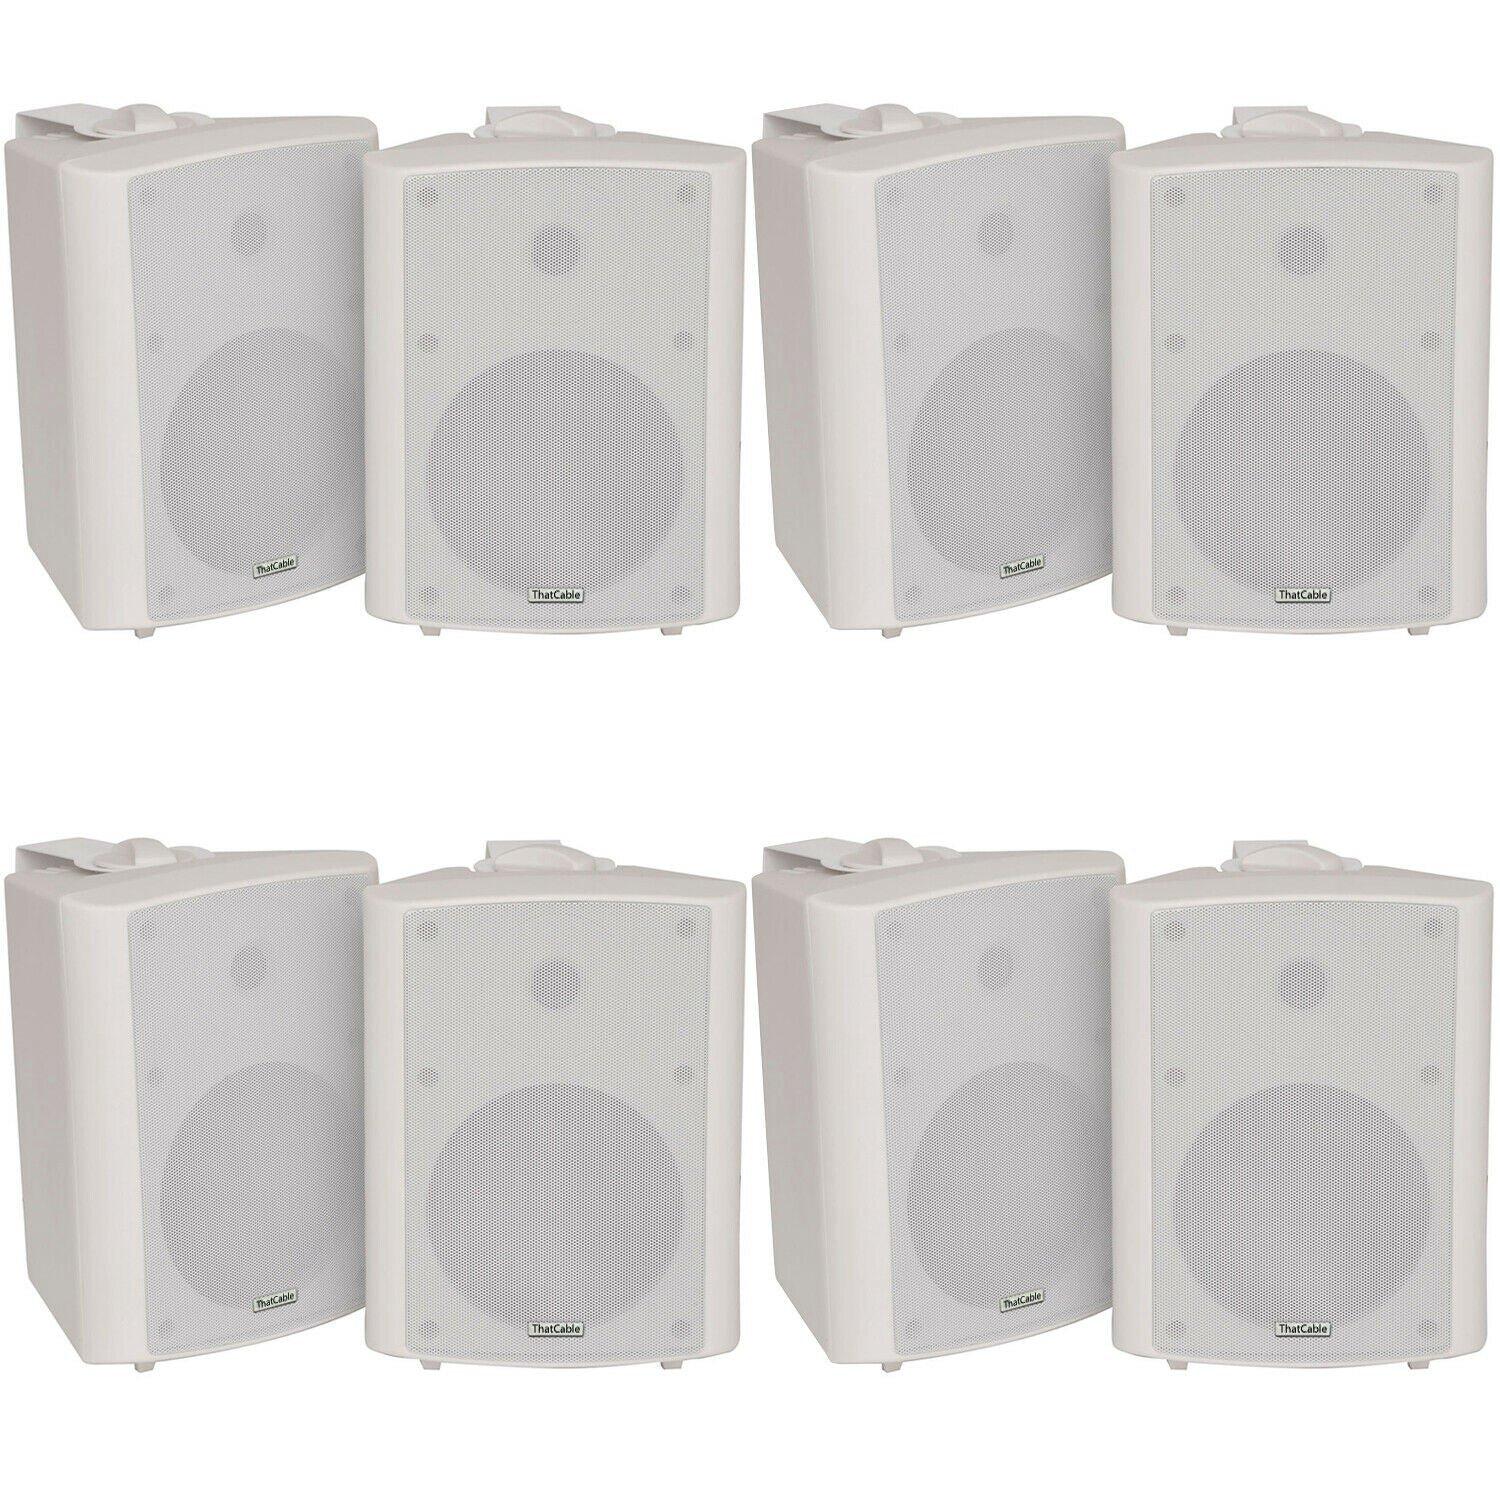 8x 90W White Wall Mounted Stereo Speakers 5.25